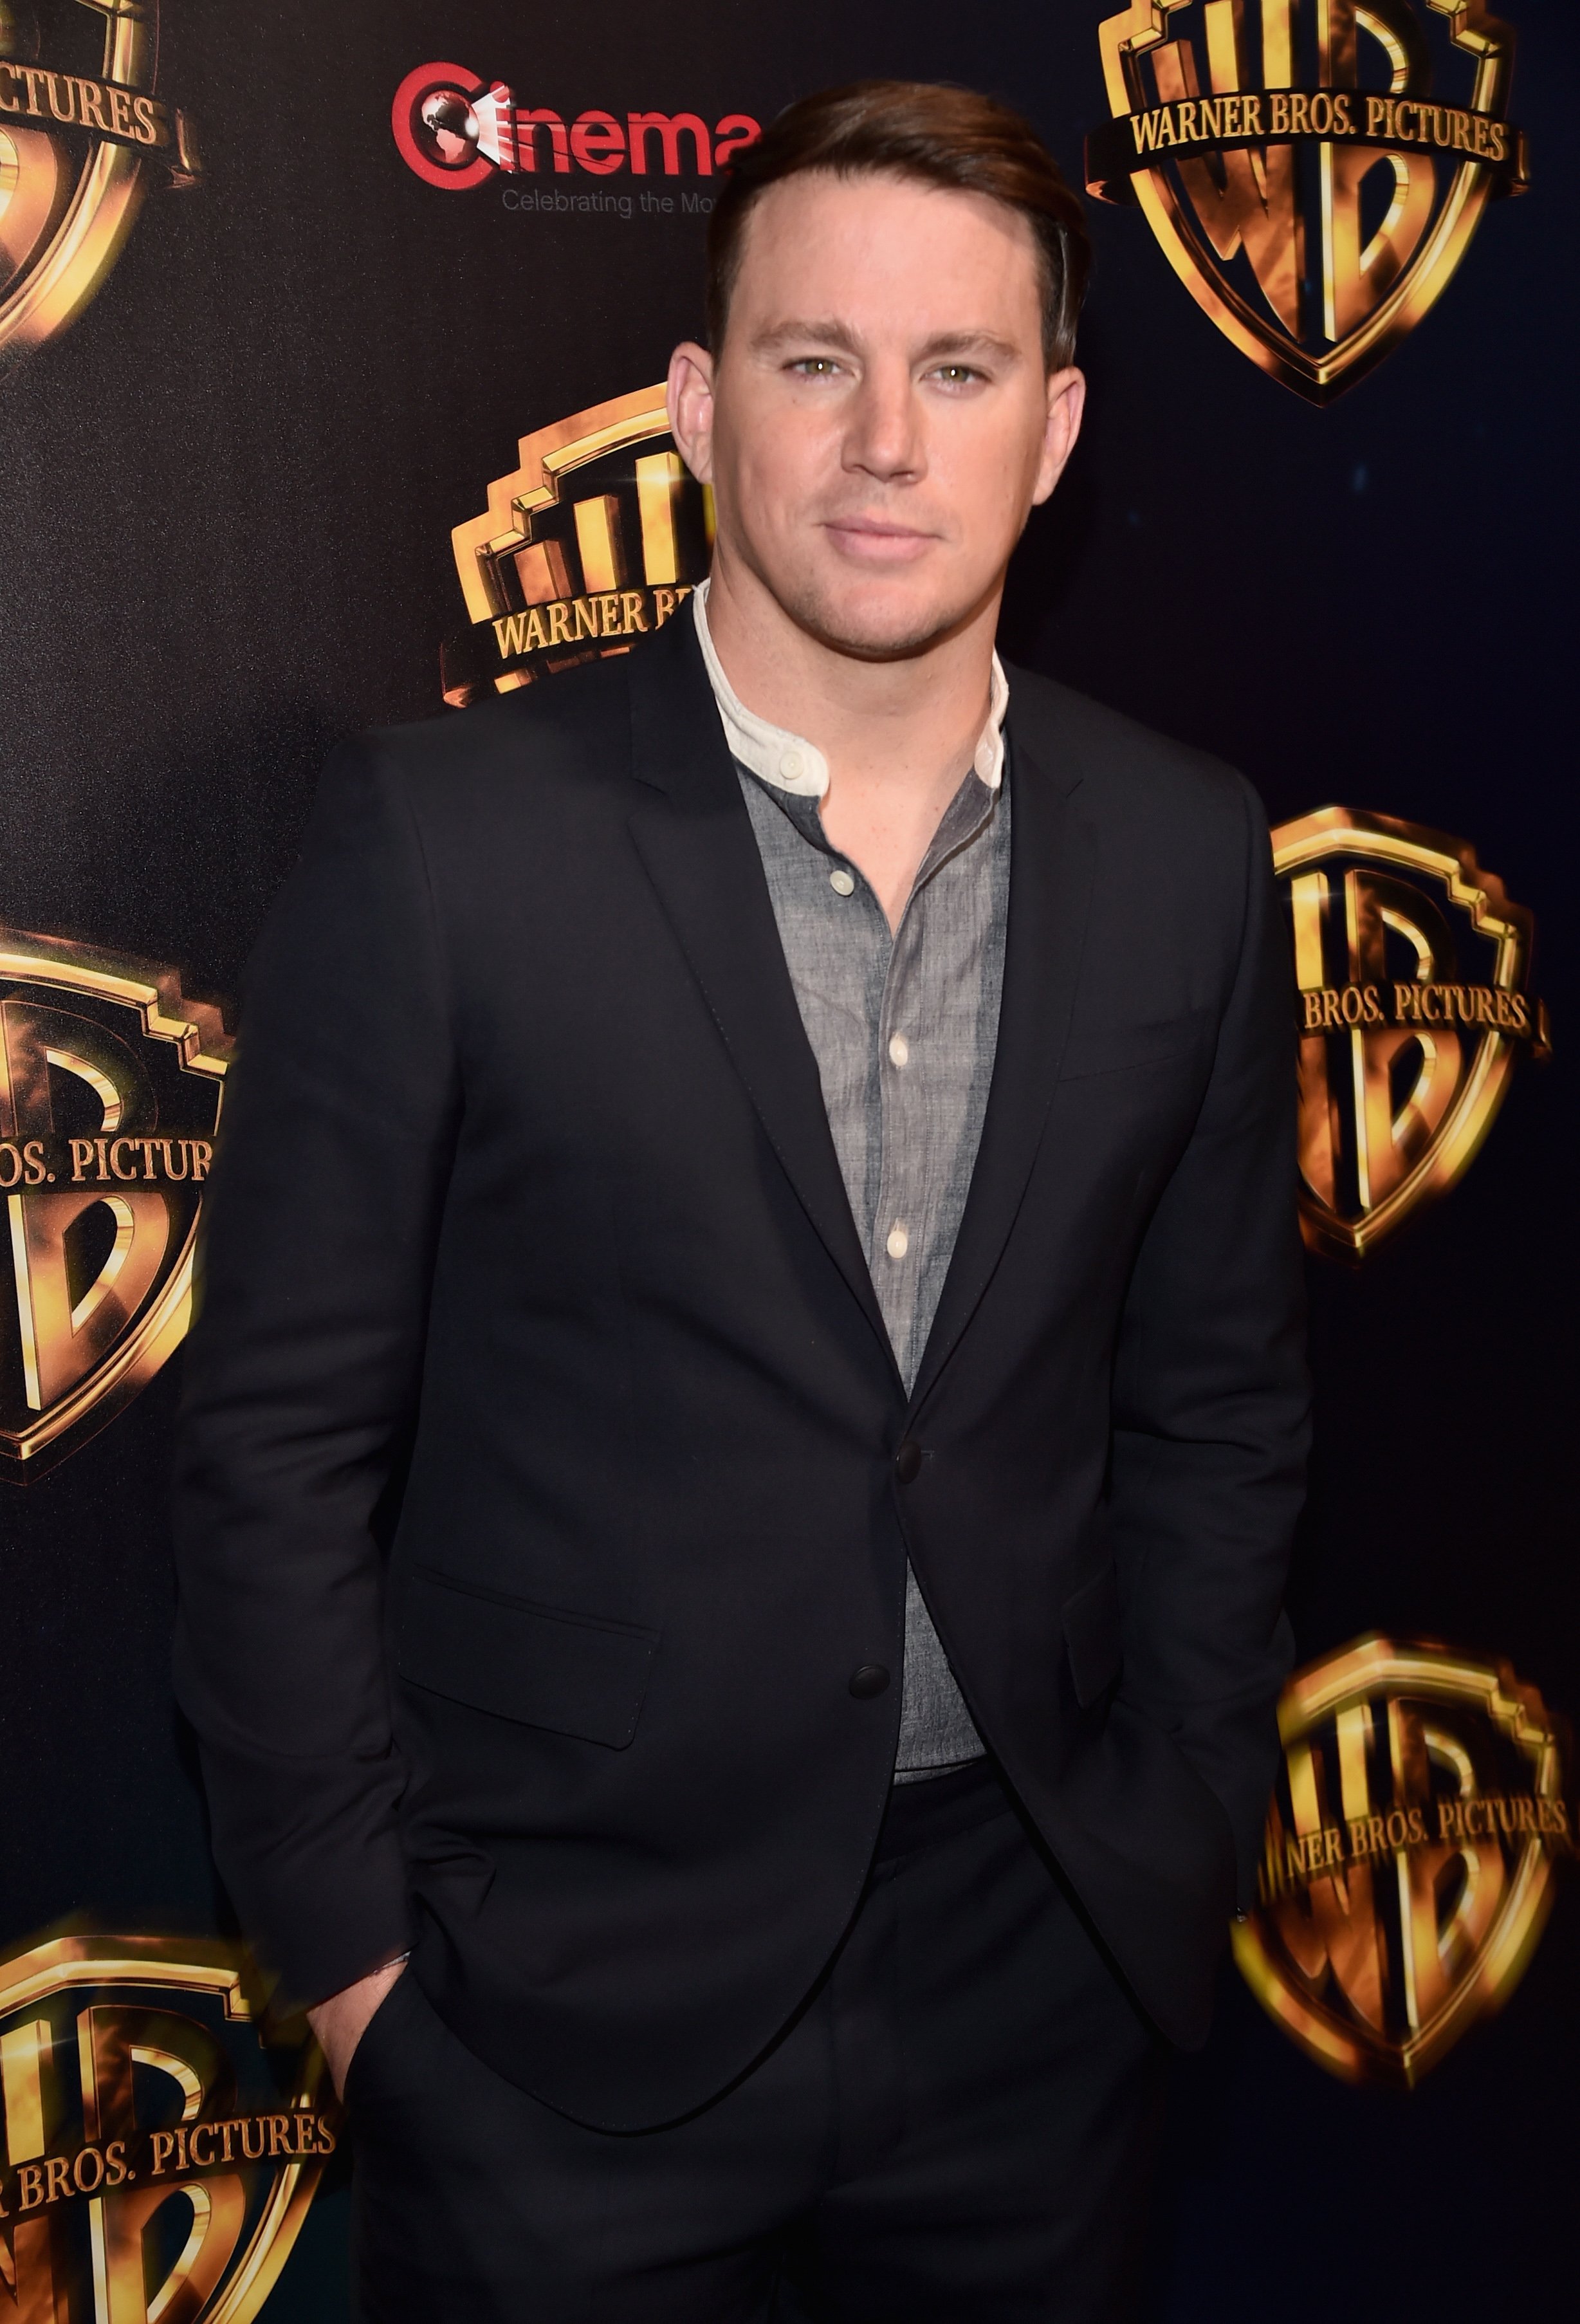  Channing Tatum attends CinemaCon 2018 on April 24, 2018 in Las Vegas, Nevada. | Source: Getty Images.